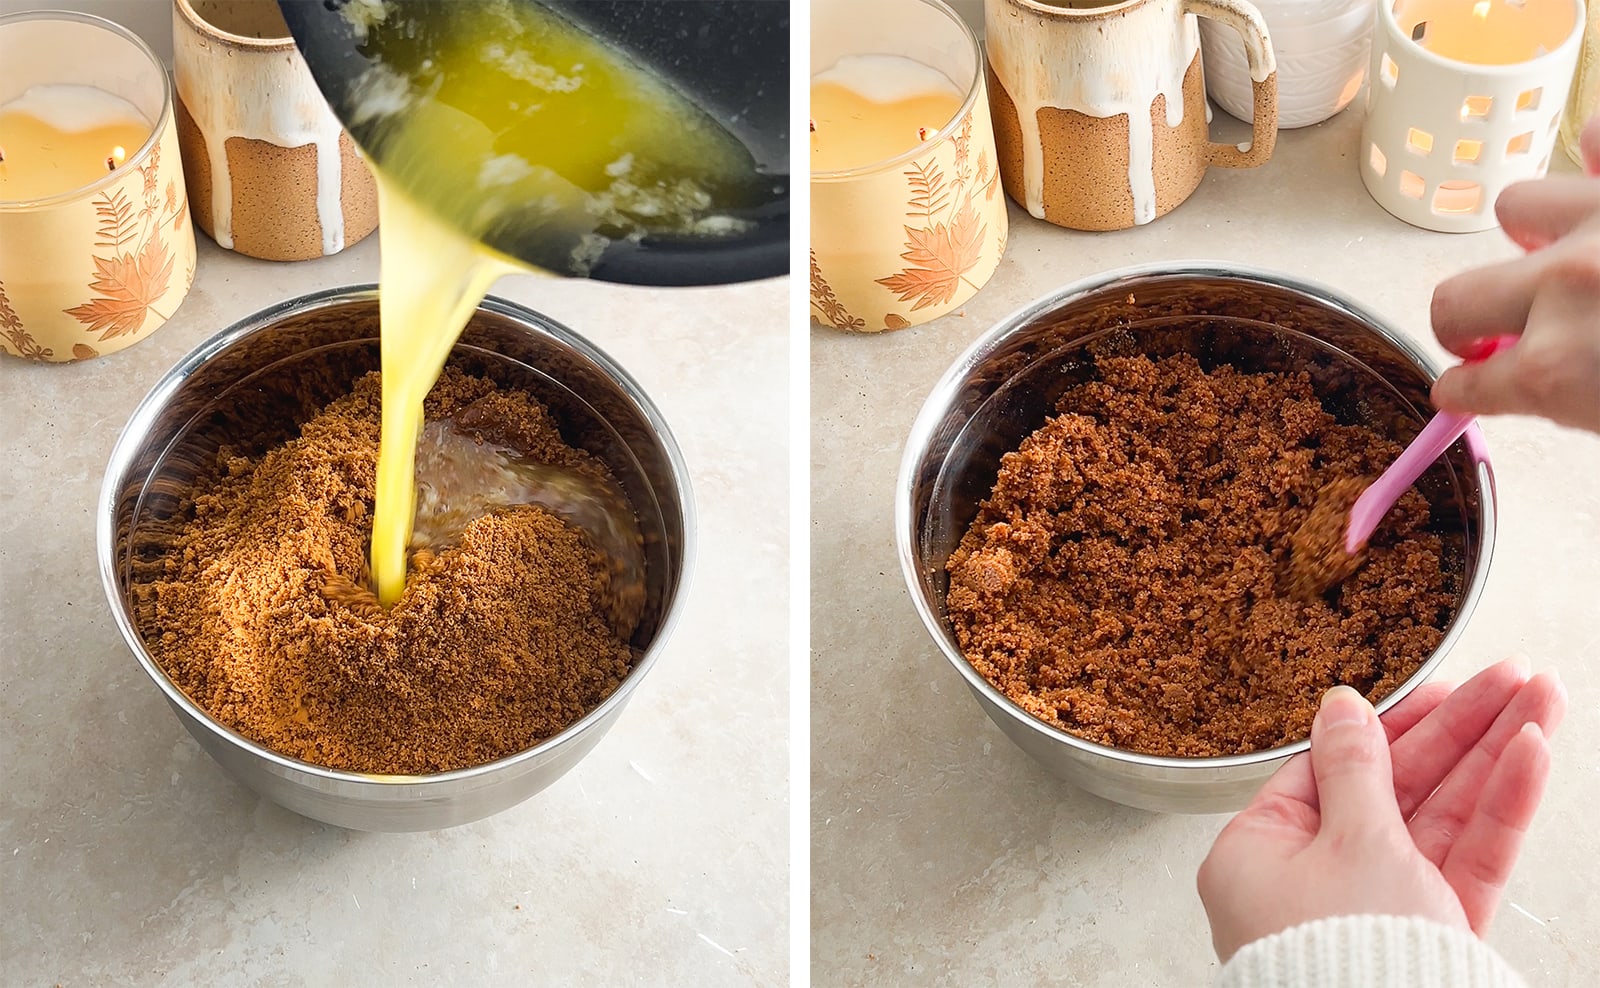 Left to right: pouring melted butter into a bowl of biscoff cookie crumbs, mixing biscoff cookie crumb mixture.